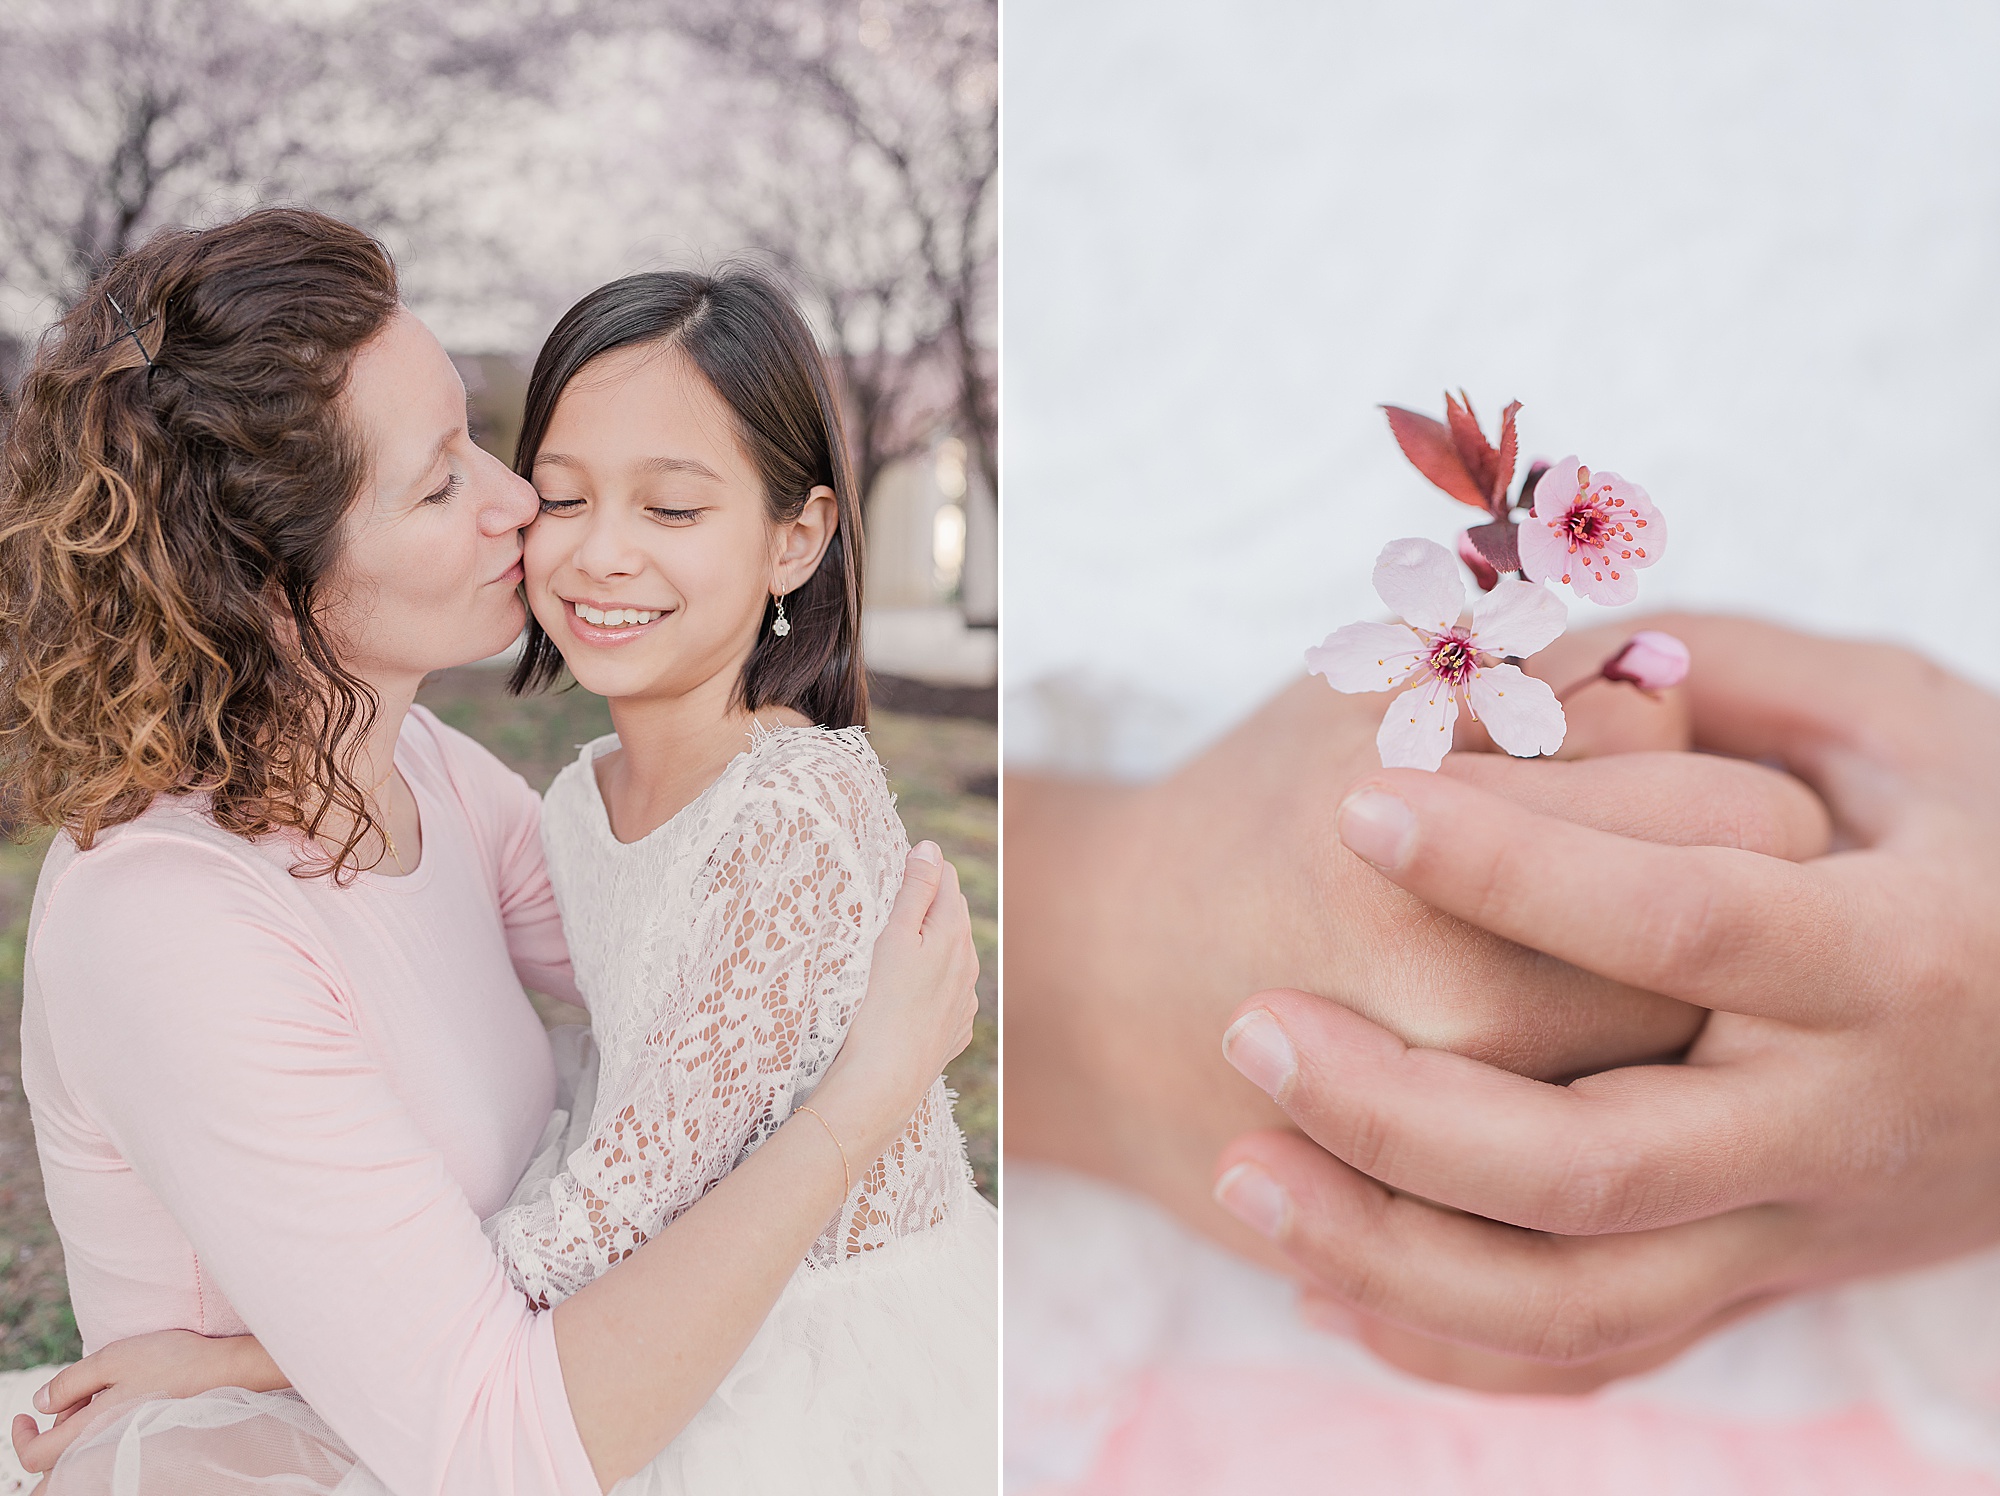 Tips for Cherry Blossom Portraits in the Spring in the DMV shared by Maryland family photographer Christina Tundo Photography